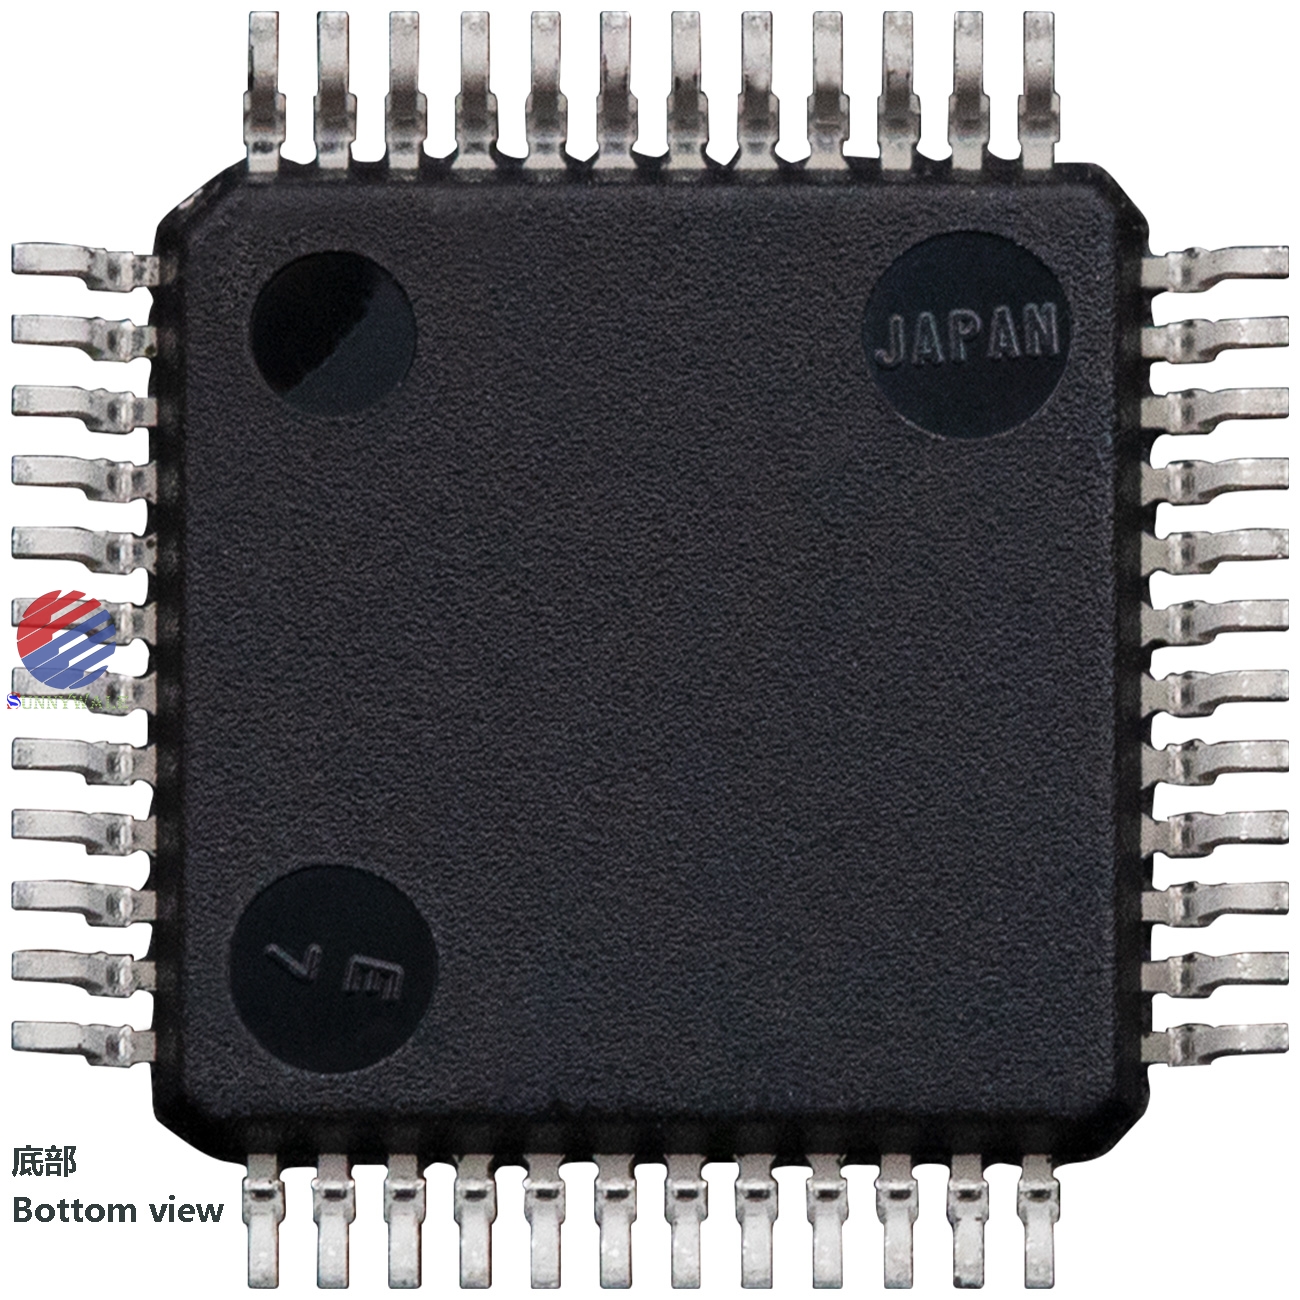 IR3Y48B1, for SHARP CCD analog security camera, LR38603 matching IC, CCD signal processing and digital interface circuit